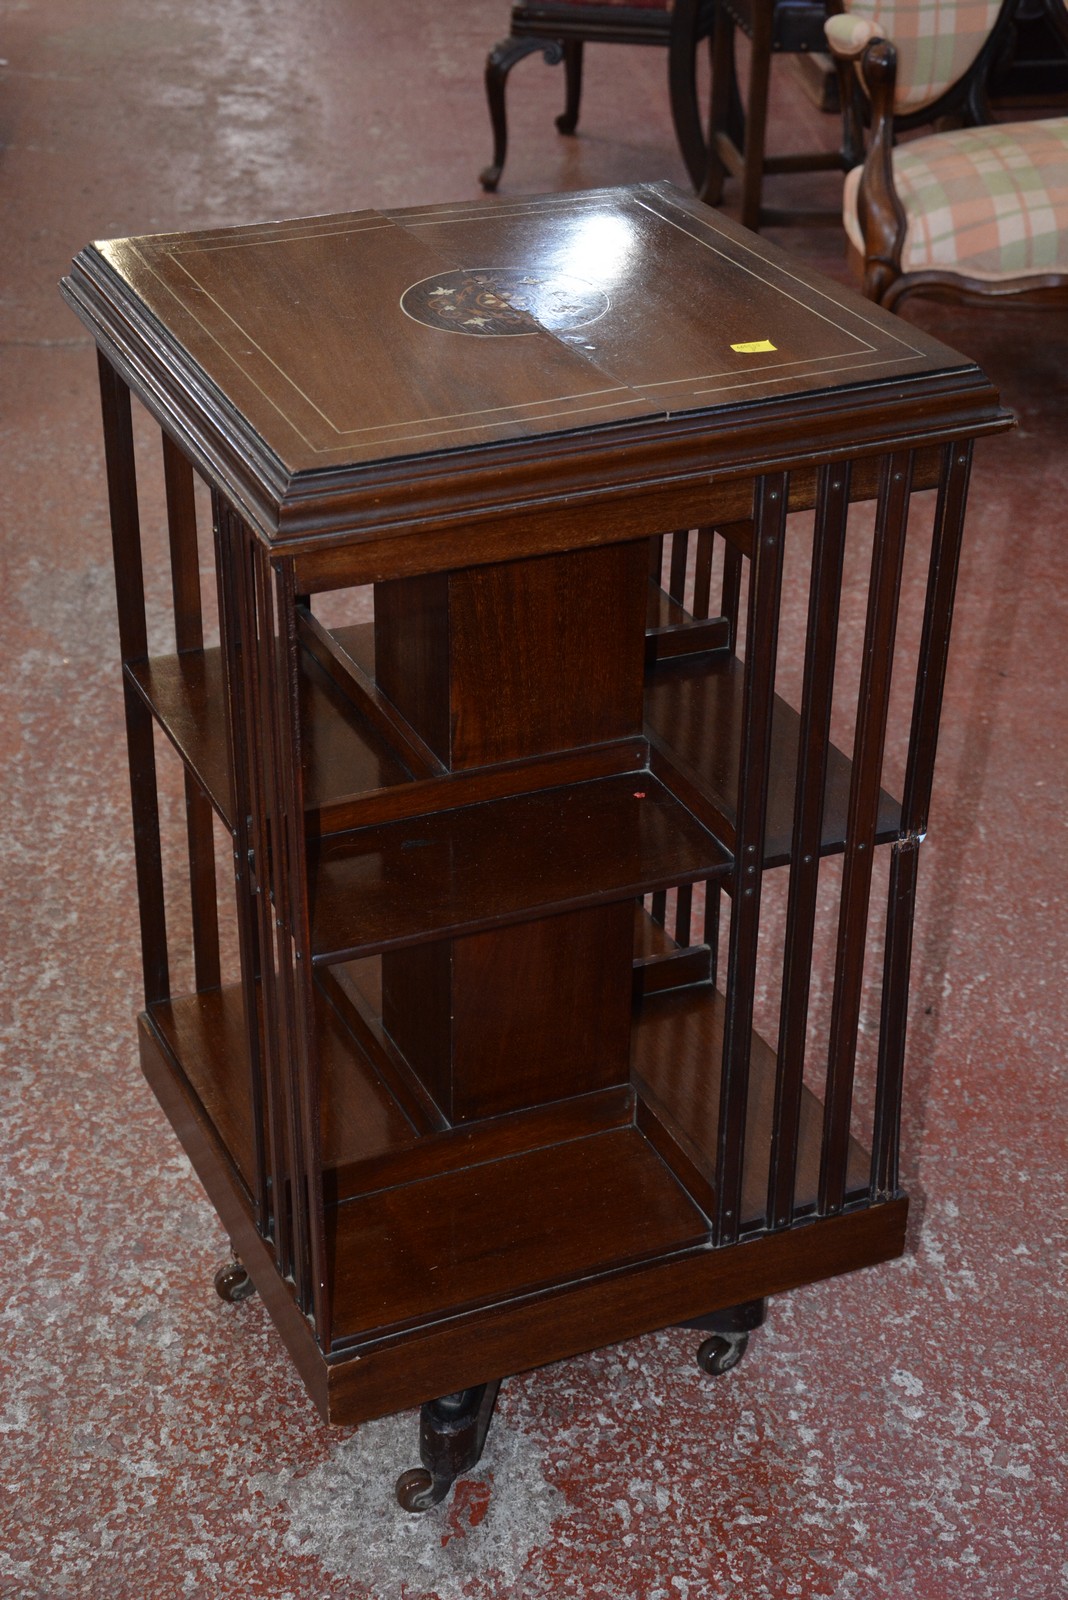 An Edwardian revolving bookcase with a floral inlaid top. (Crack to top)